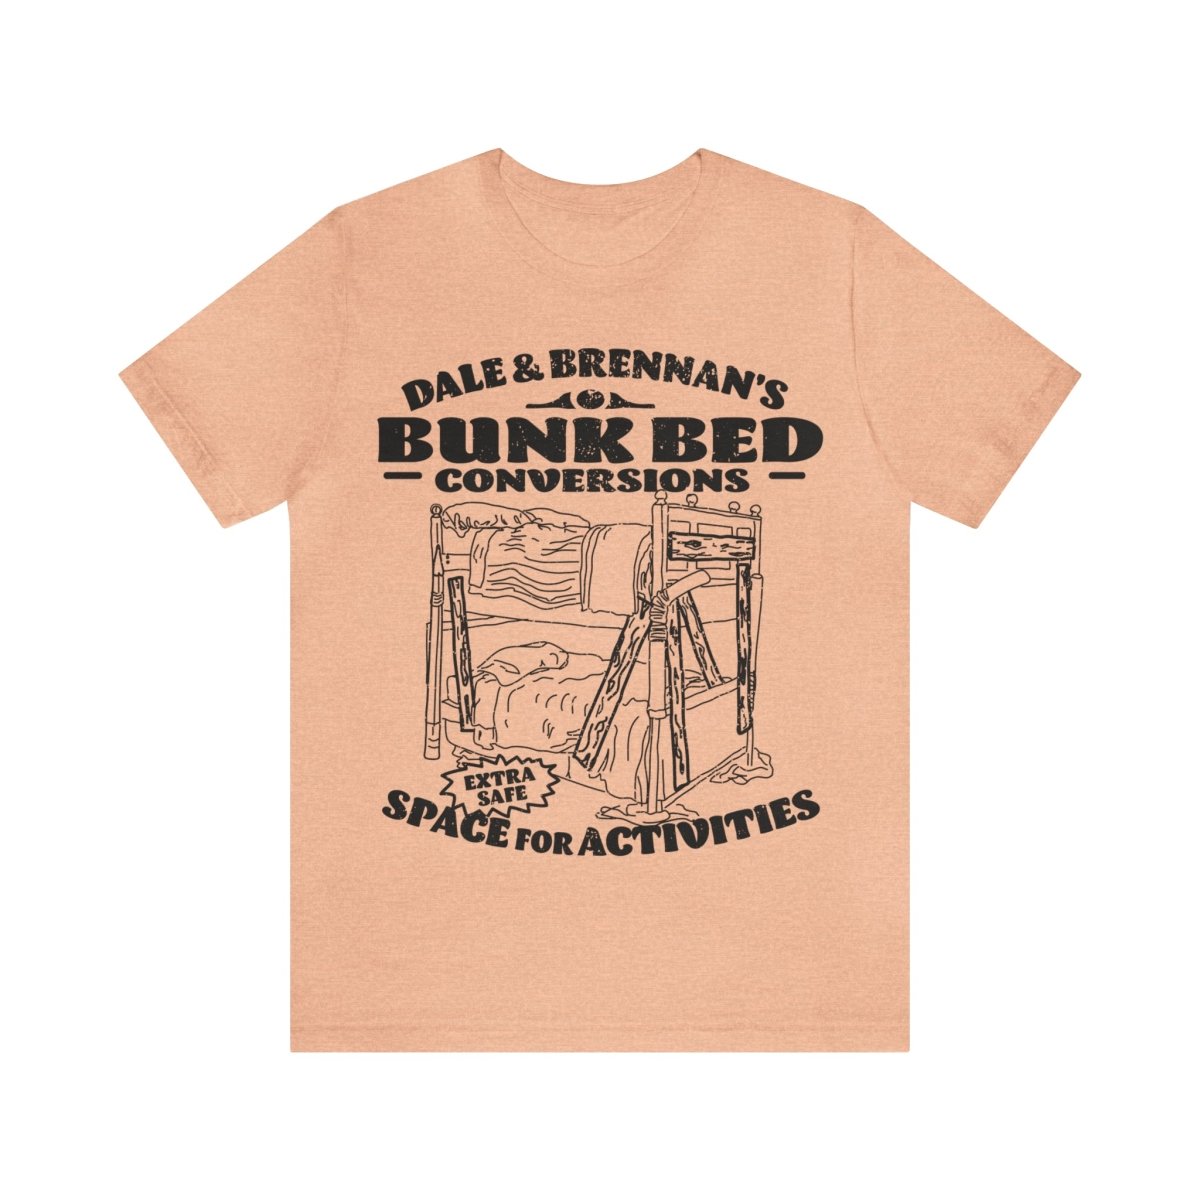 Dale & Brennan's Bunk Beds Conversion Premium T-Shirt, Activity Space, Funny